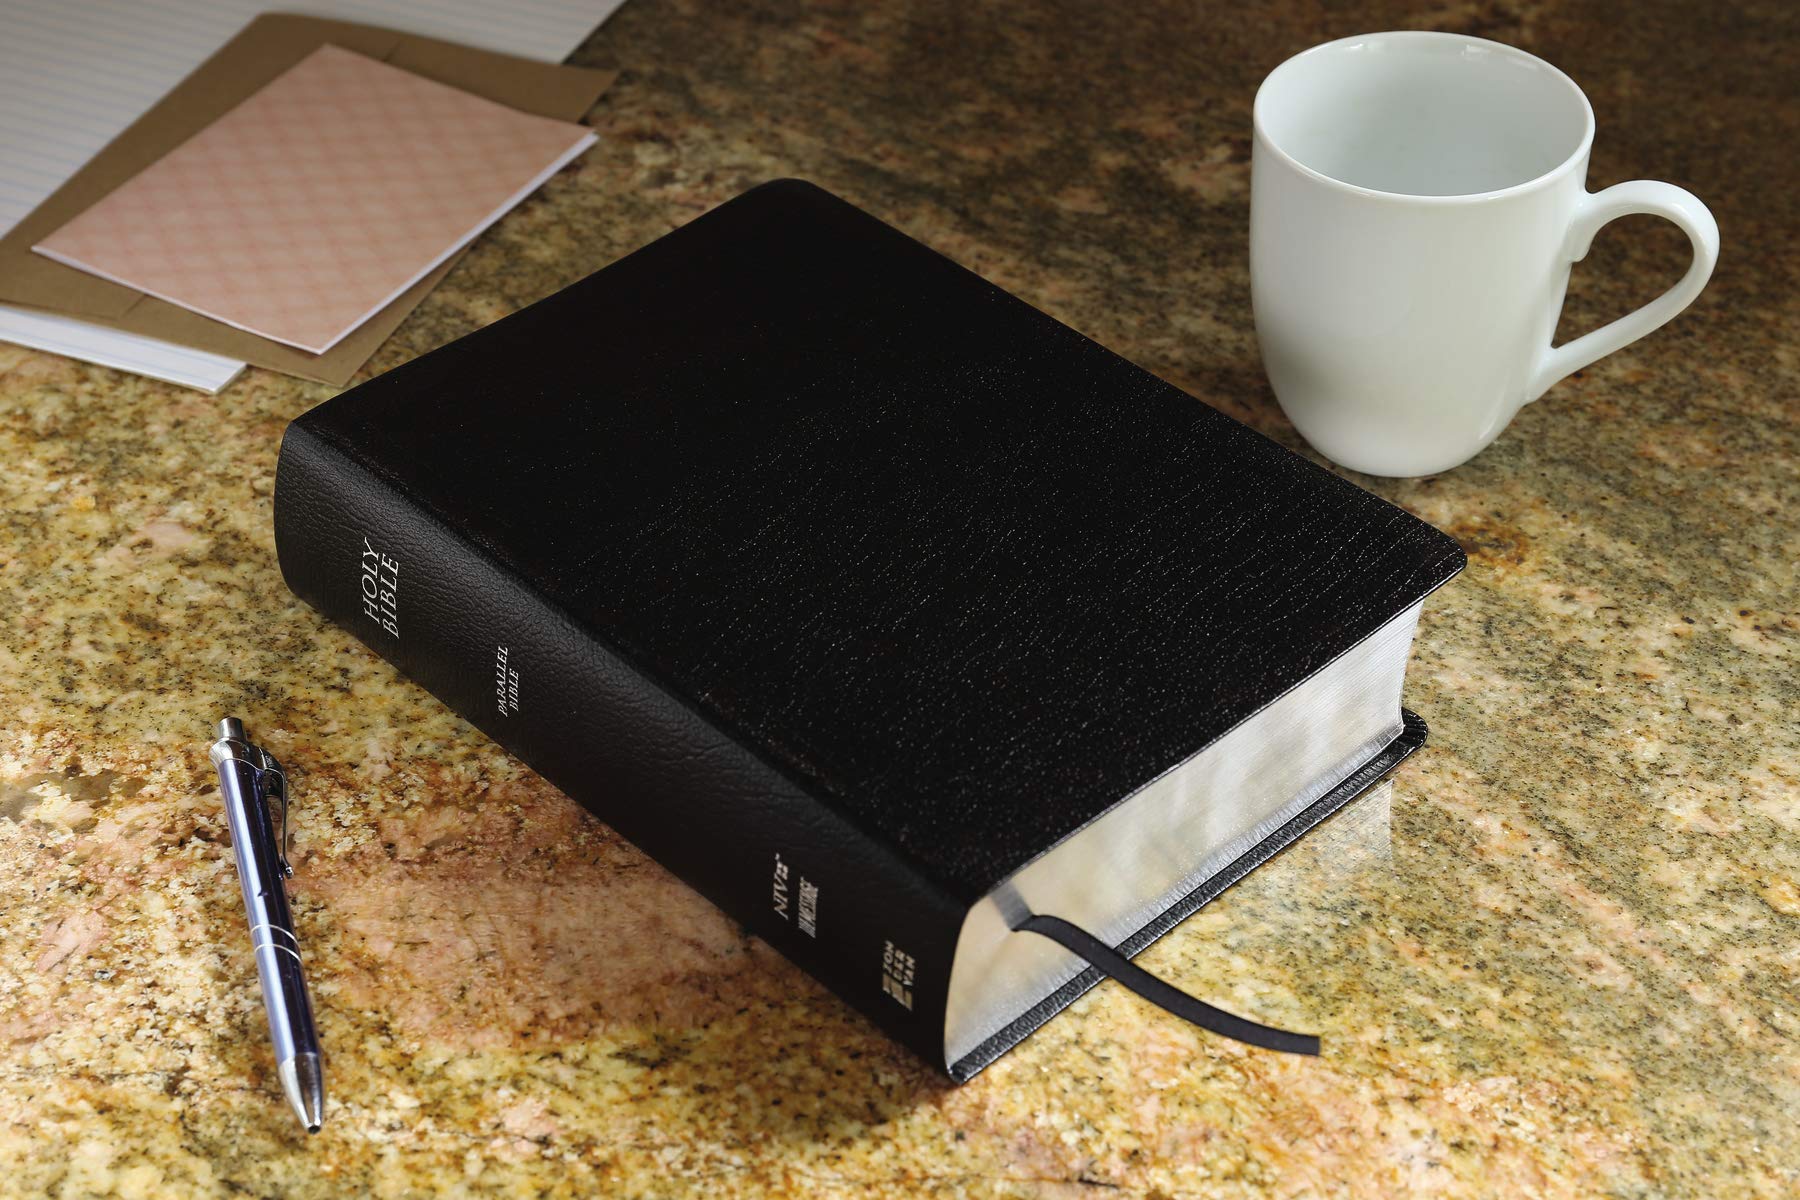 NIV, The Message, Parallel Bible, Large Print, Bonded Leather, Black: Two Bible Versions Together for Study and Comparison